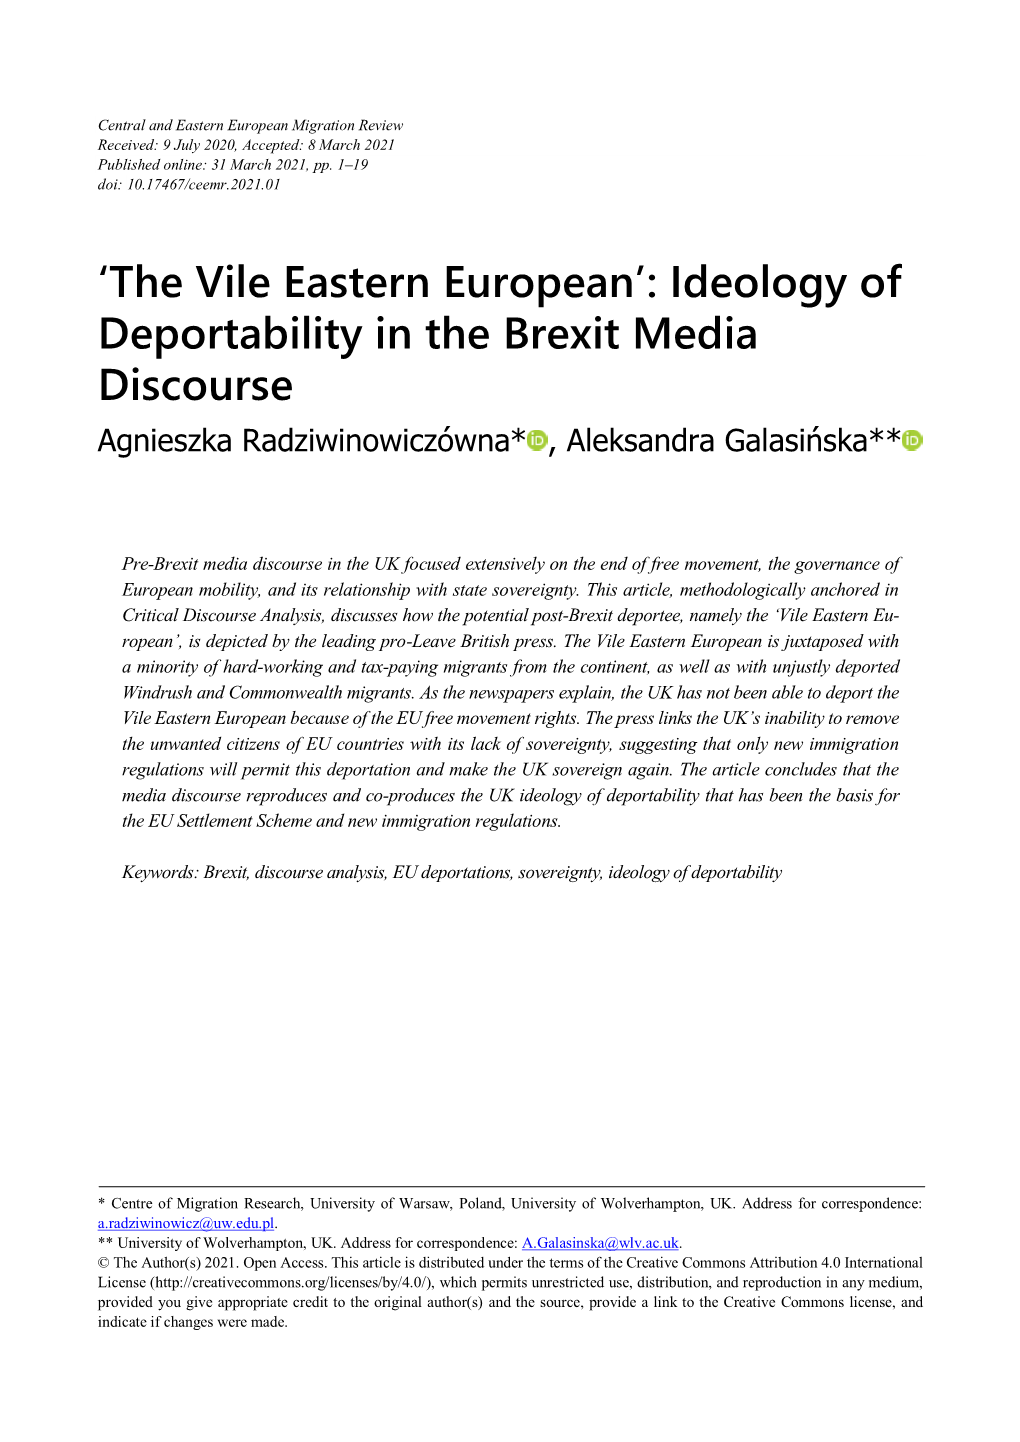 'The Vile Eastern European': Ideology of Deportability in the Brexit Media